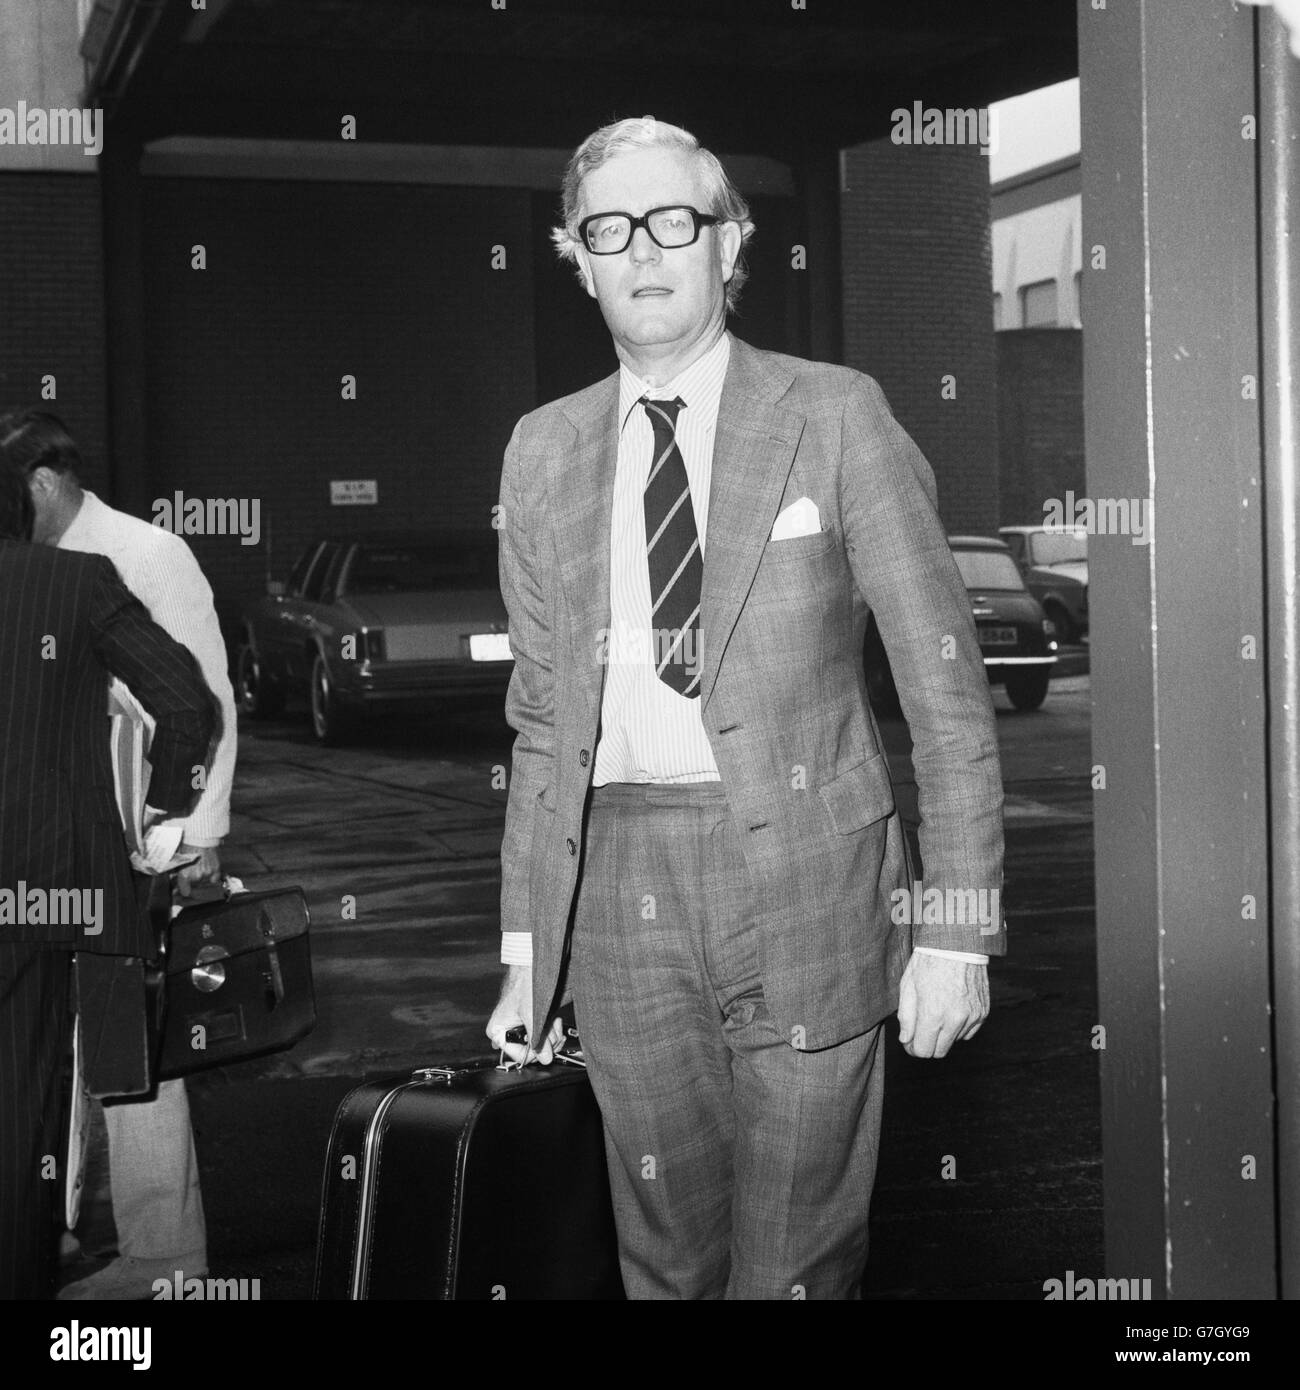 Douglas Hurd, a senior Minister of State at the Foreign Office, at London's Heathrow Airport when he left the country for talks with Saudi Arabia's foreign minister, Crown Prince Sayd, concerned with re-establishing cordial relations after the UK broadcast the TV film of a 'Death of a Princess'. Stock Photo